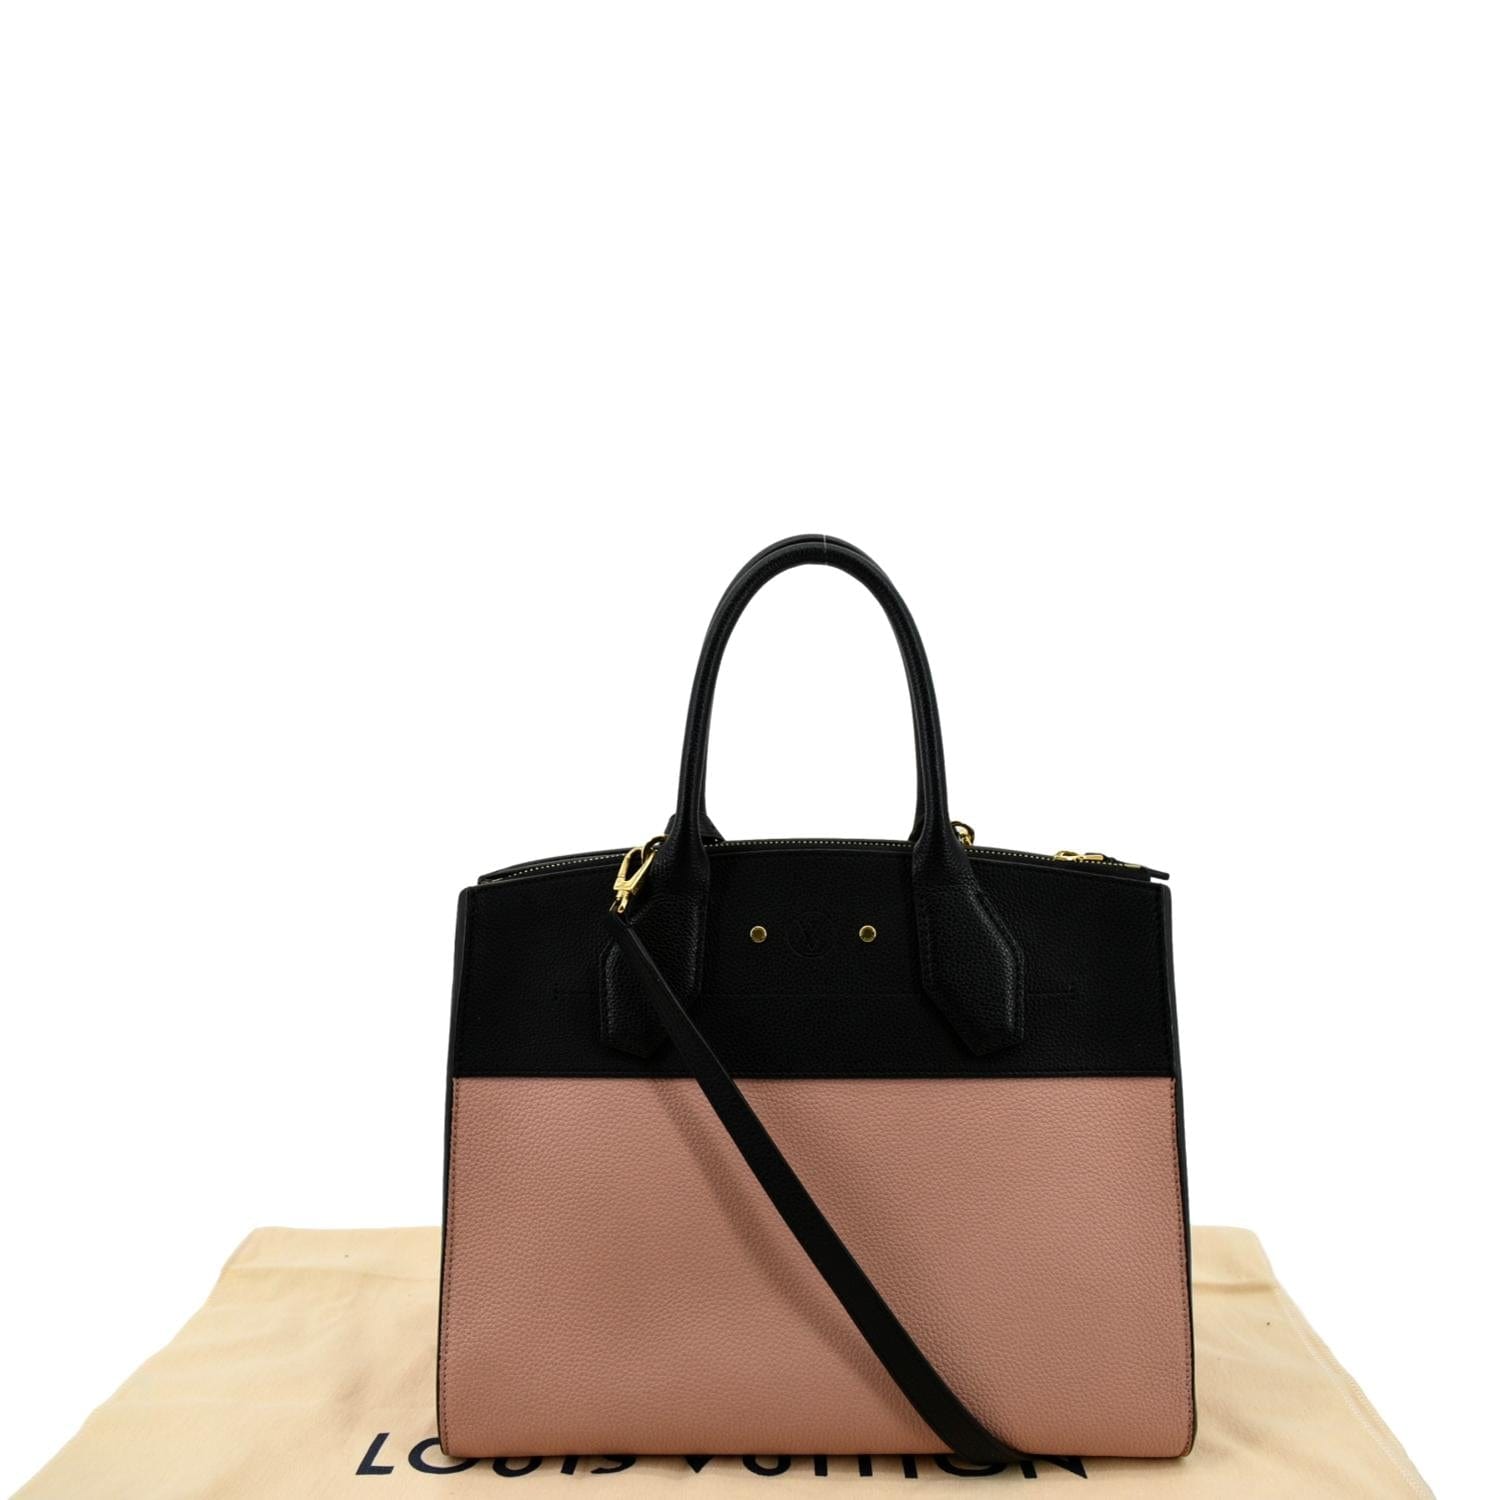 Louis Vuitton - City Steamer Tote leather bag